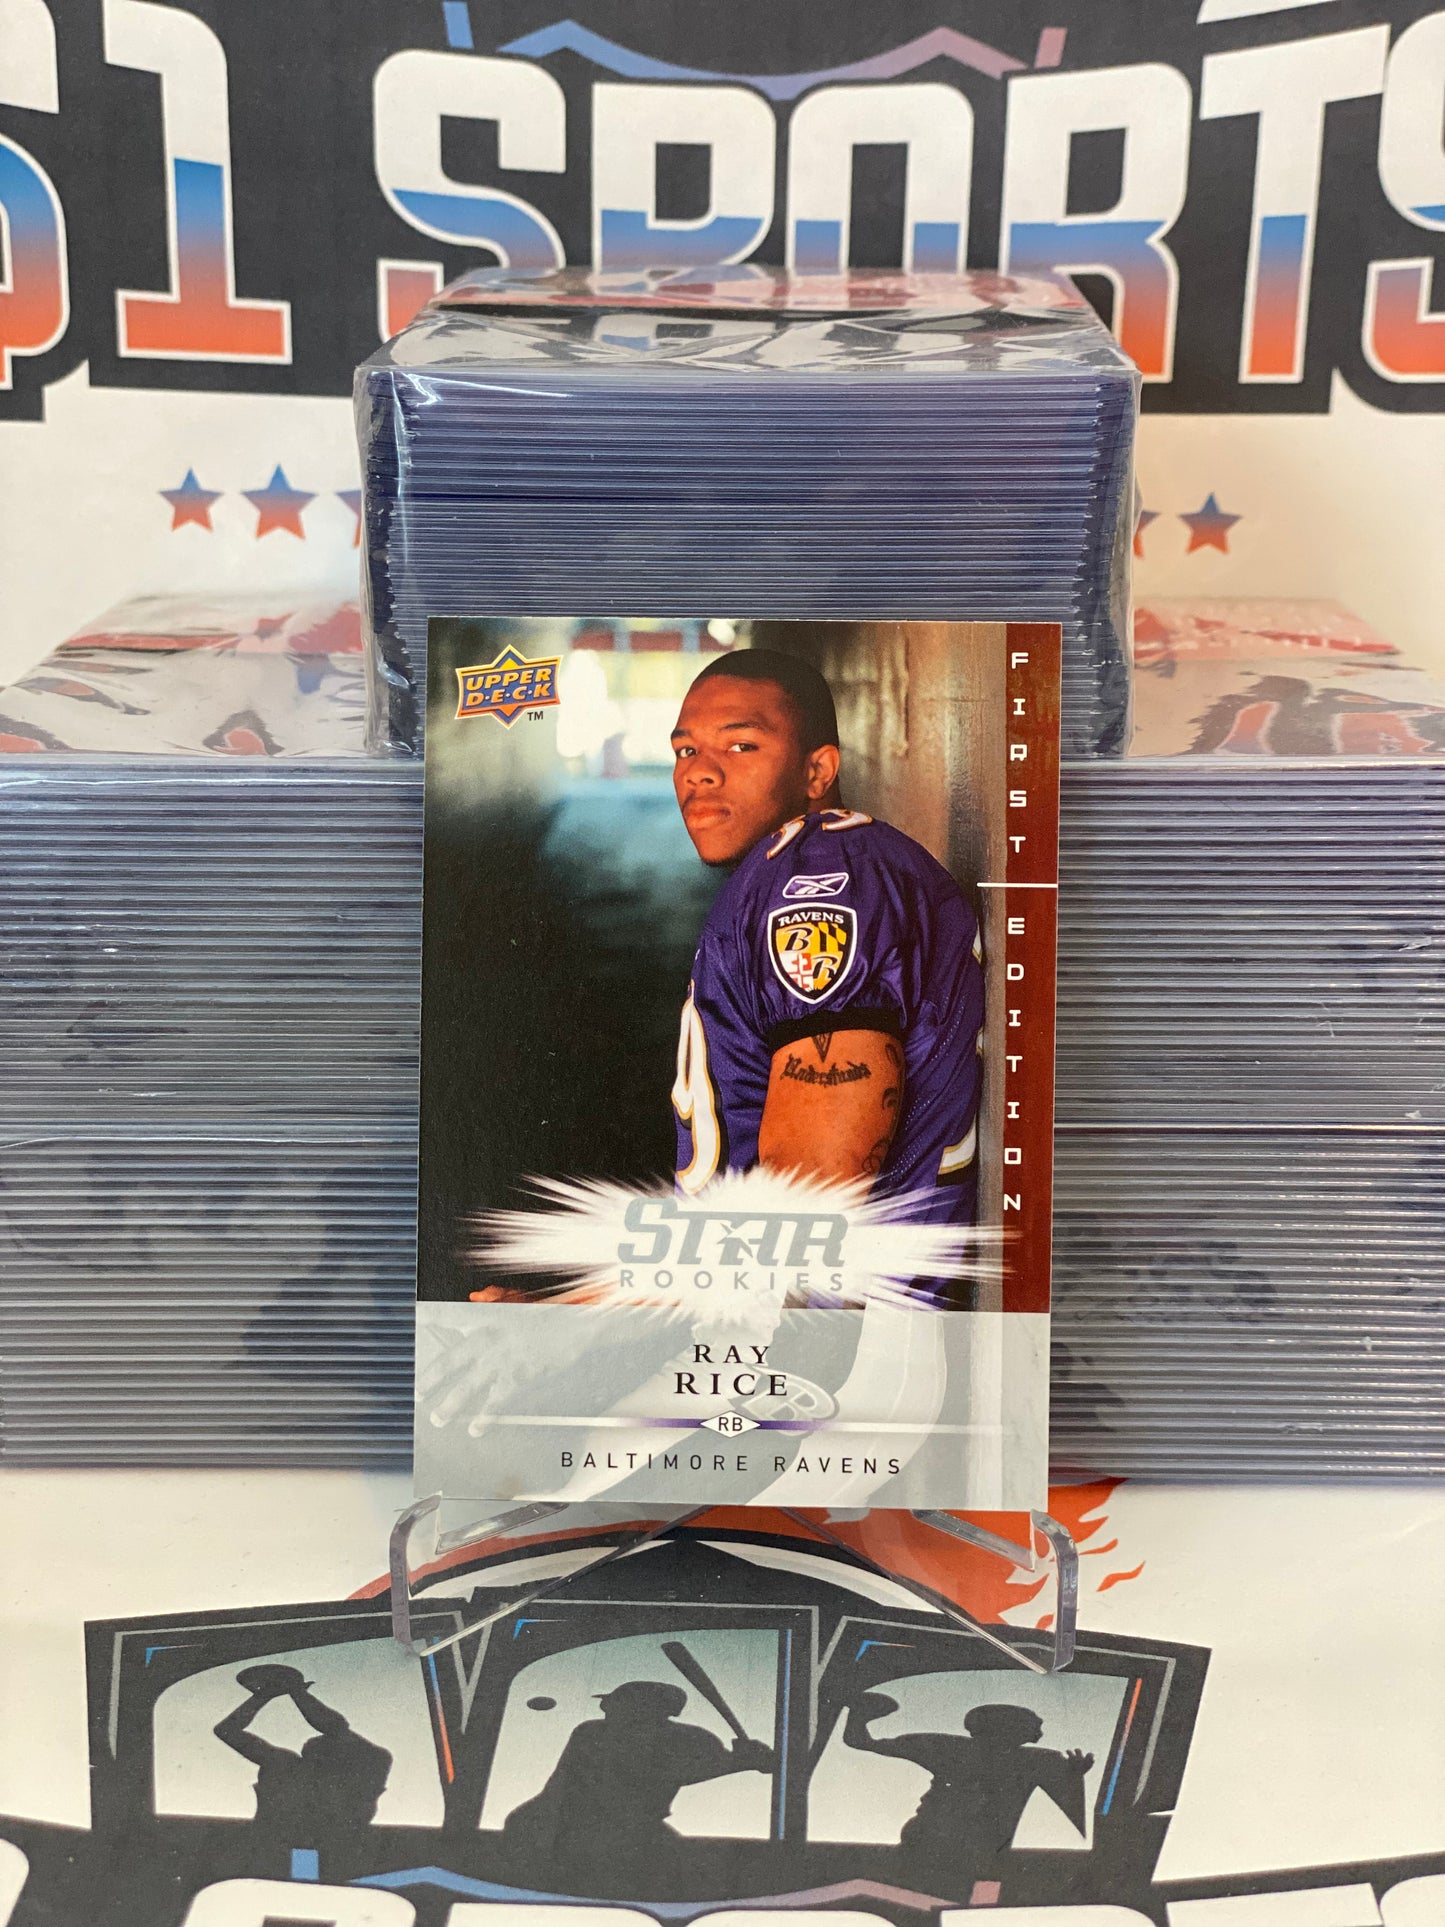 2008 Upper Deck (Star Rookies) Ray Rice #187